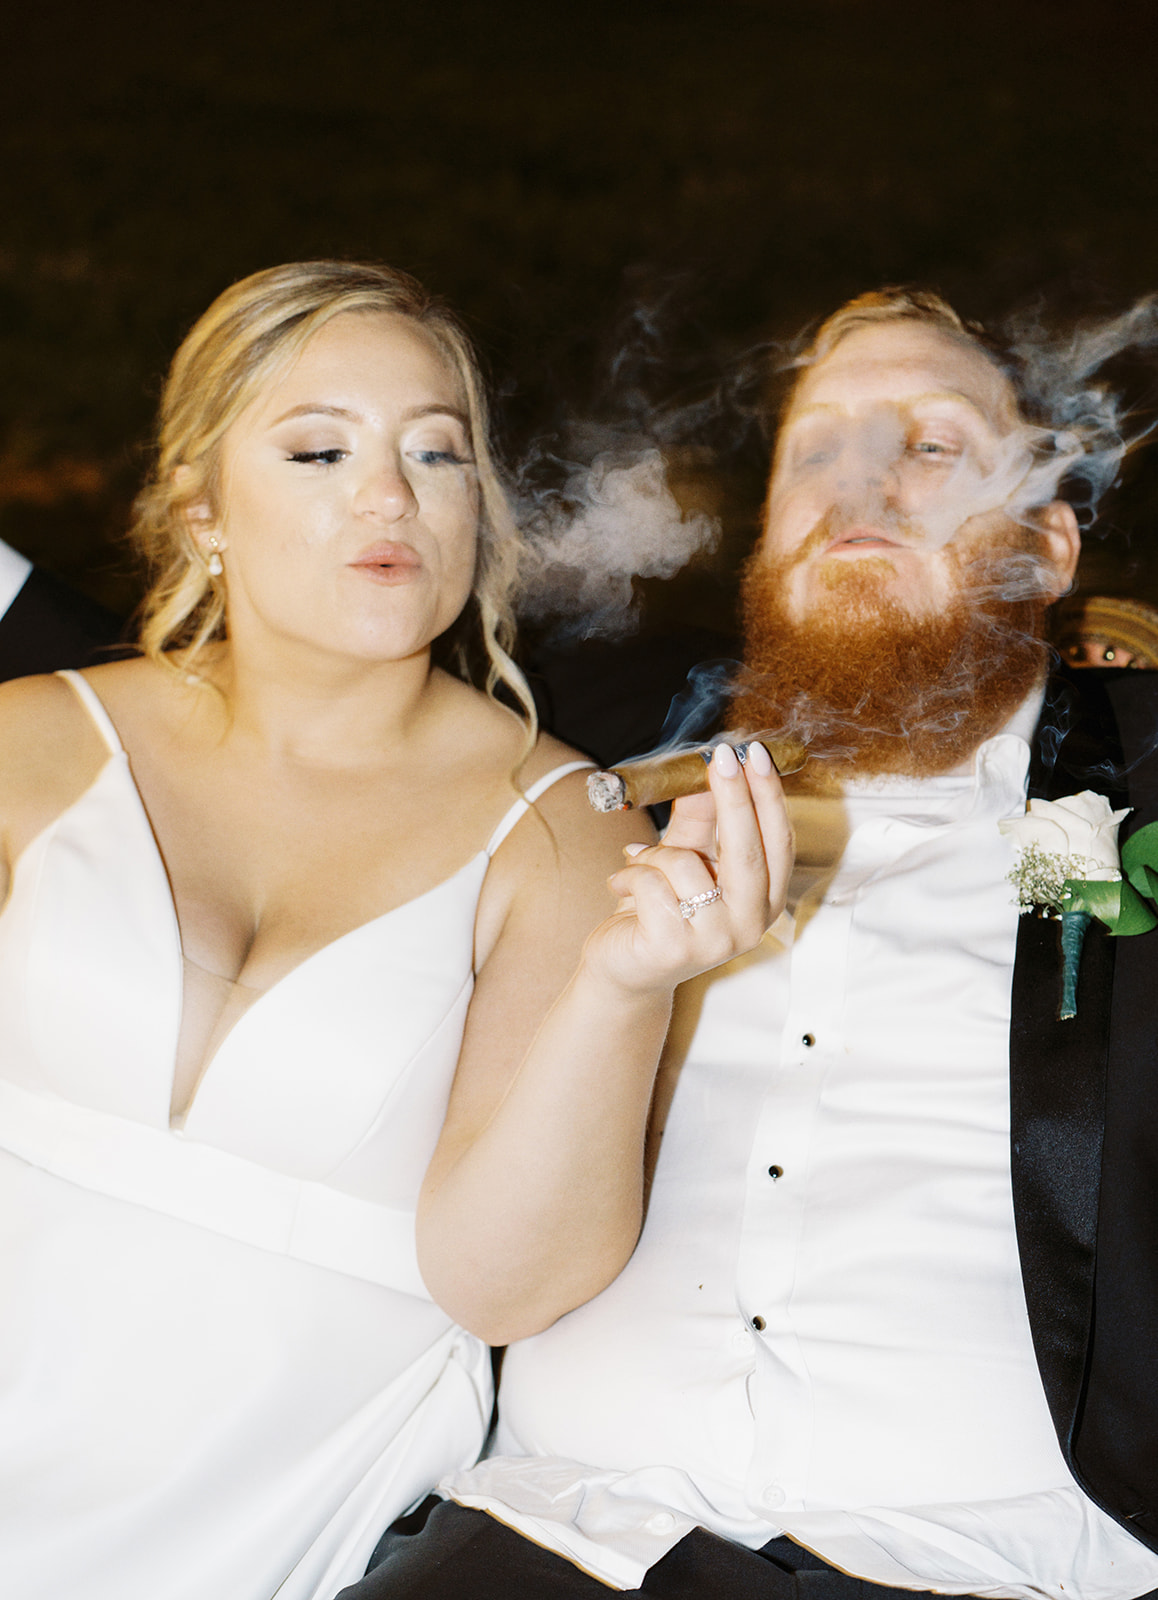 The bride and groom share a cigar during their wedding reception at Infinity Event Venue